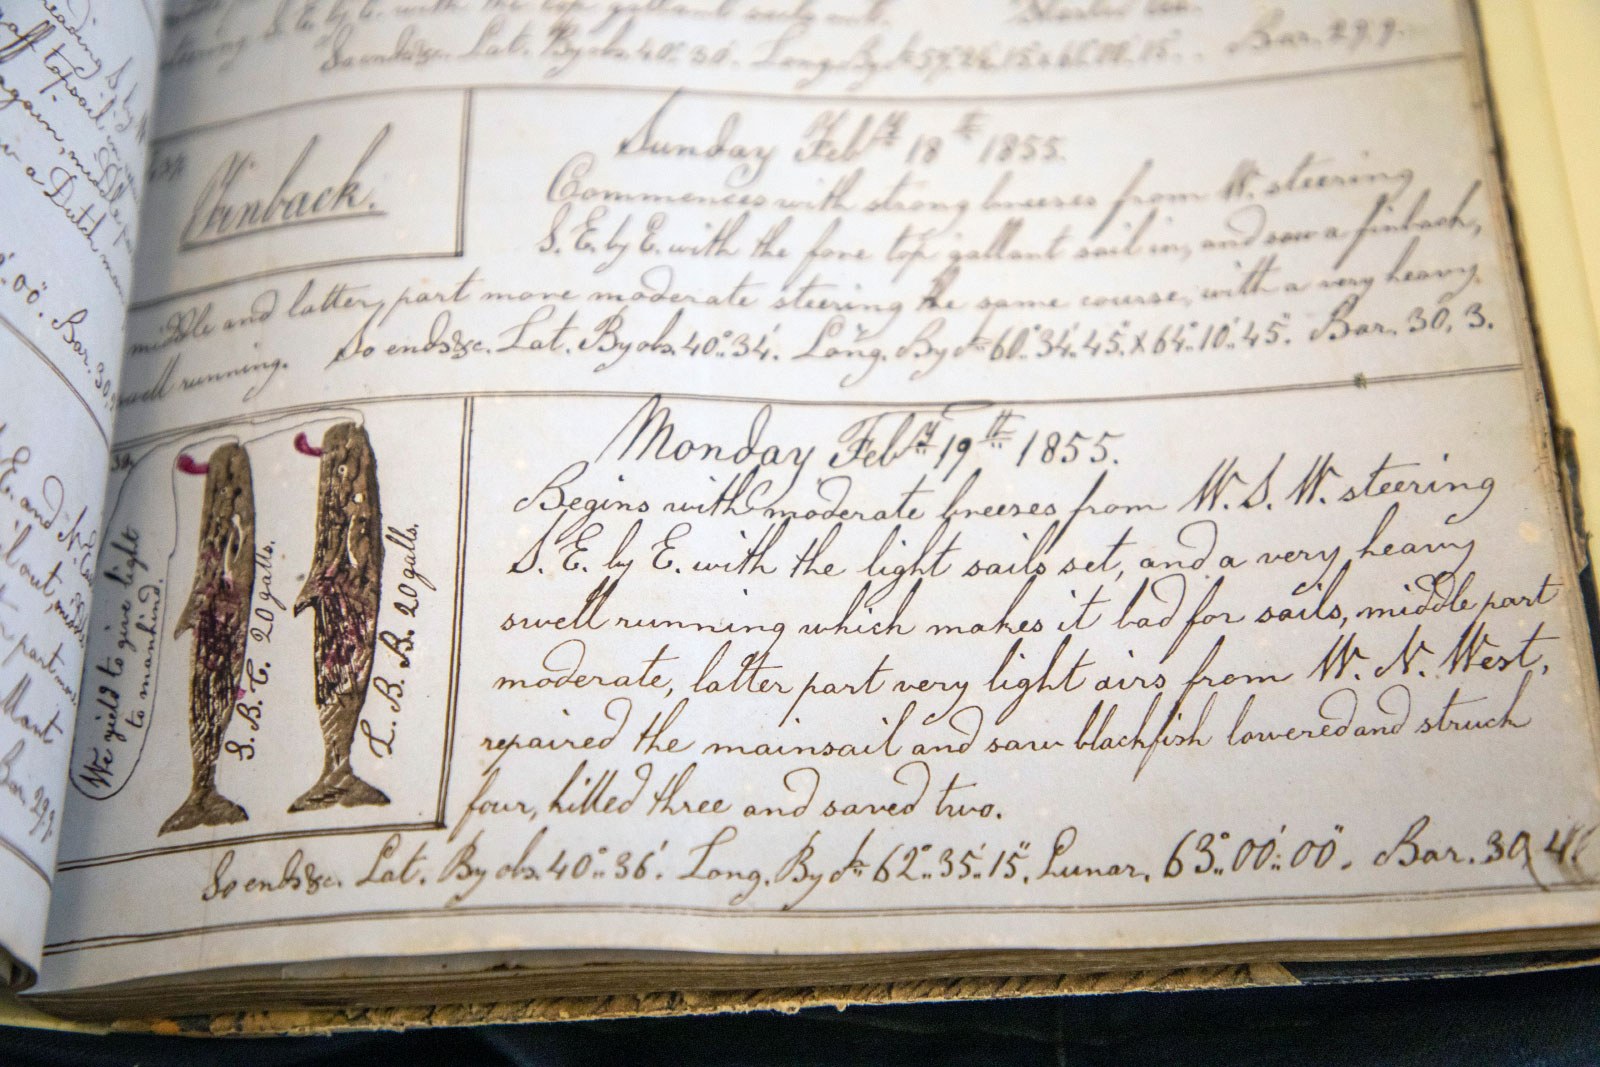 Drawings of whales appear in an old whaling logbook